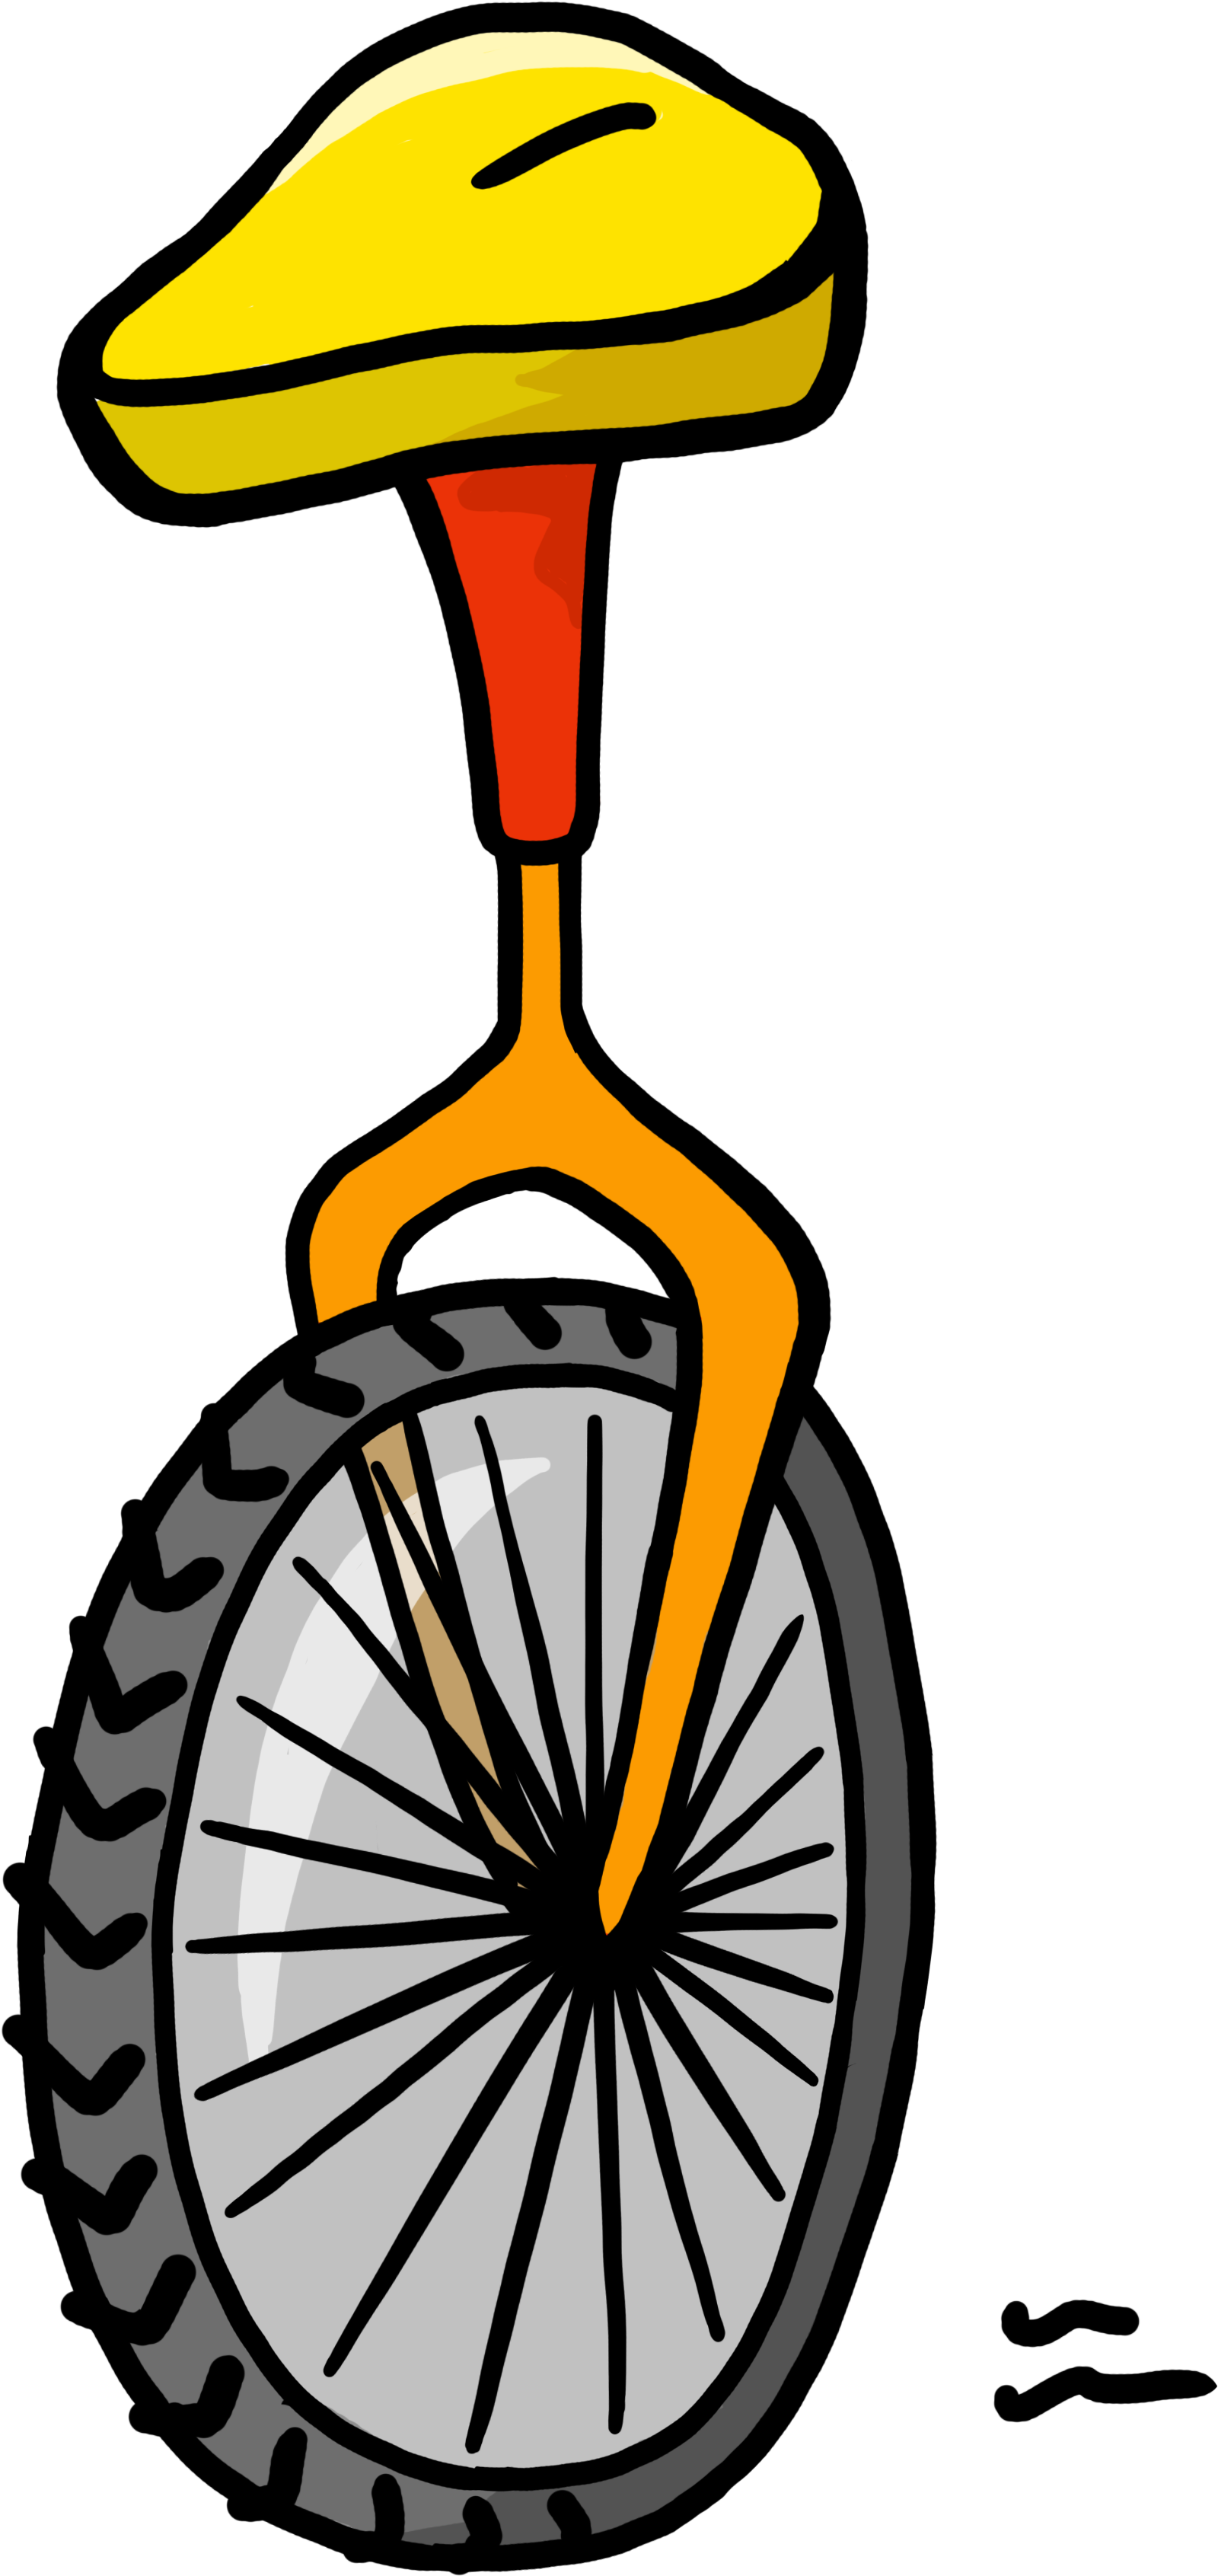 A Cartoon Of A Unicycle